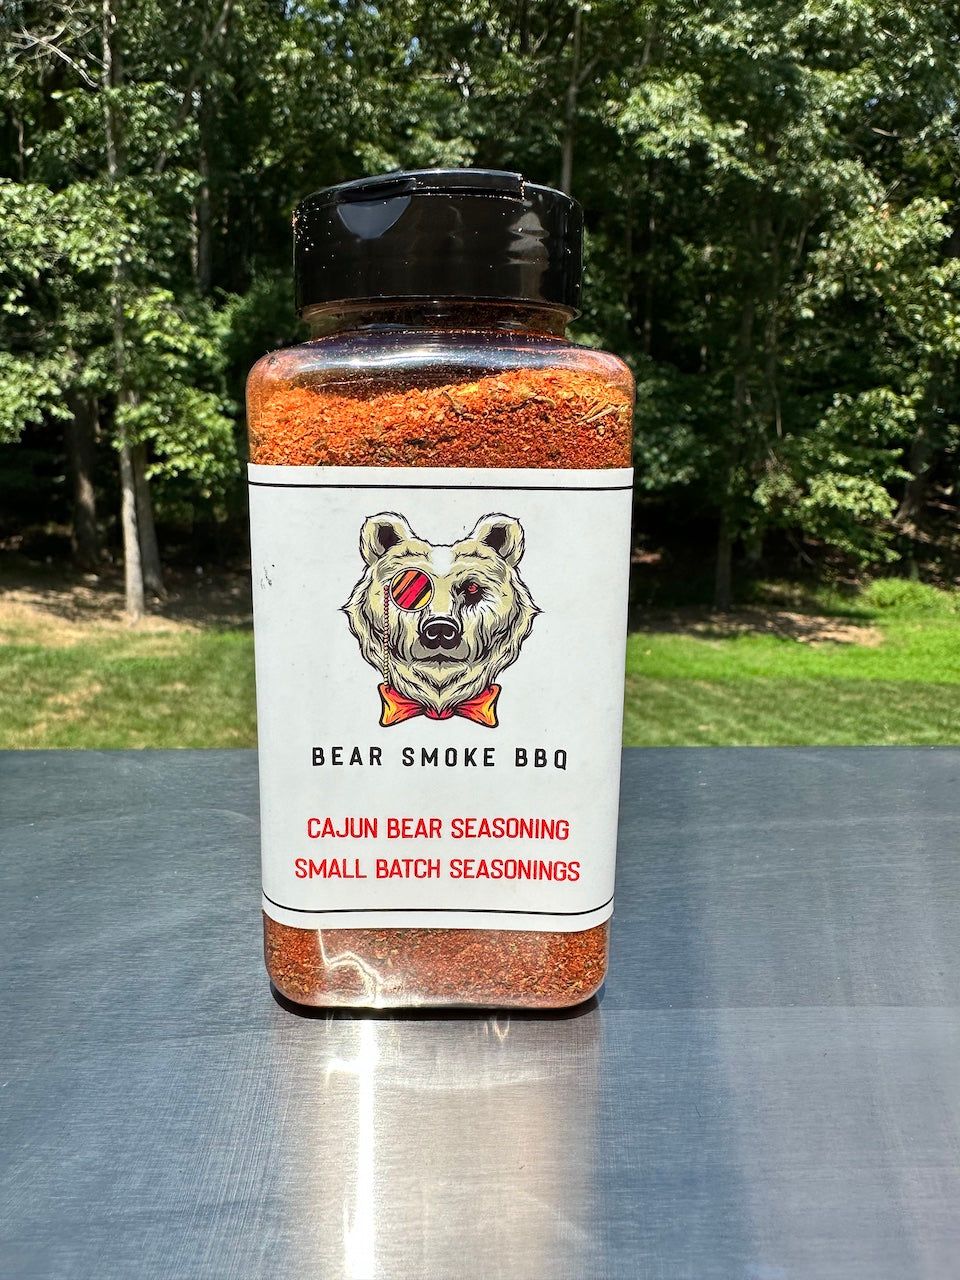 This is the Bear's take on Cajun Seasoning.  after spending almost 4 years living in New Orleans the Bear fell in love with the spice and flavor of cajun cooking.   All of our Hand Crafted BBQ Rubs and Seasoning Blends perfect for everyday use not just for barbecue are made with the highest quality ingredients. No Additives, No Preservatives, No MSG, Gluten Free, Vegan! Only the good stuff!